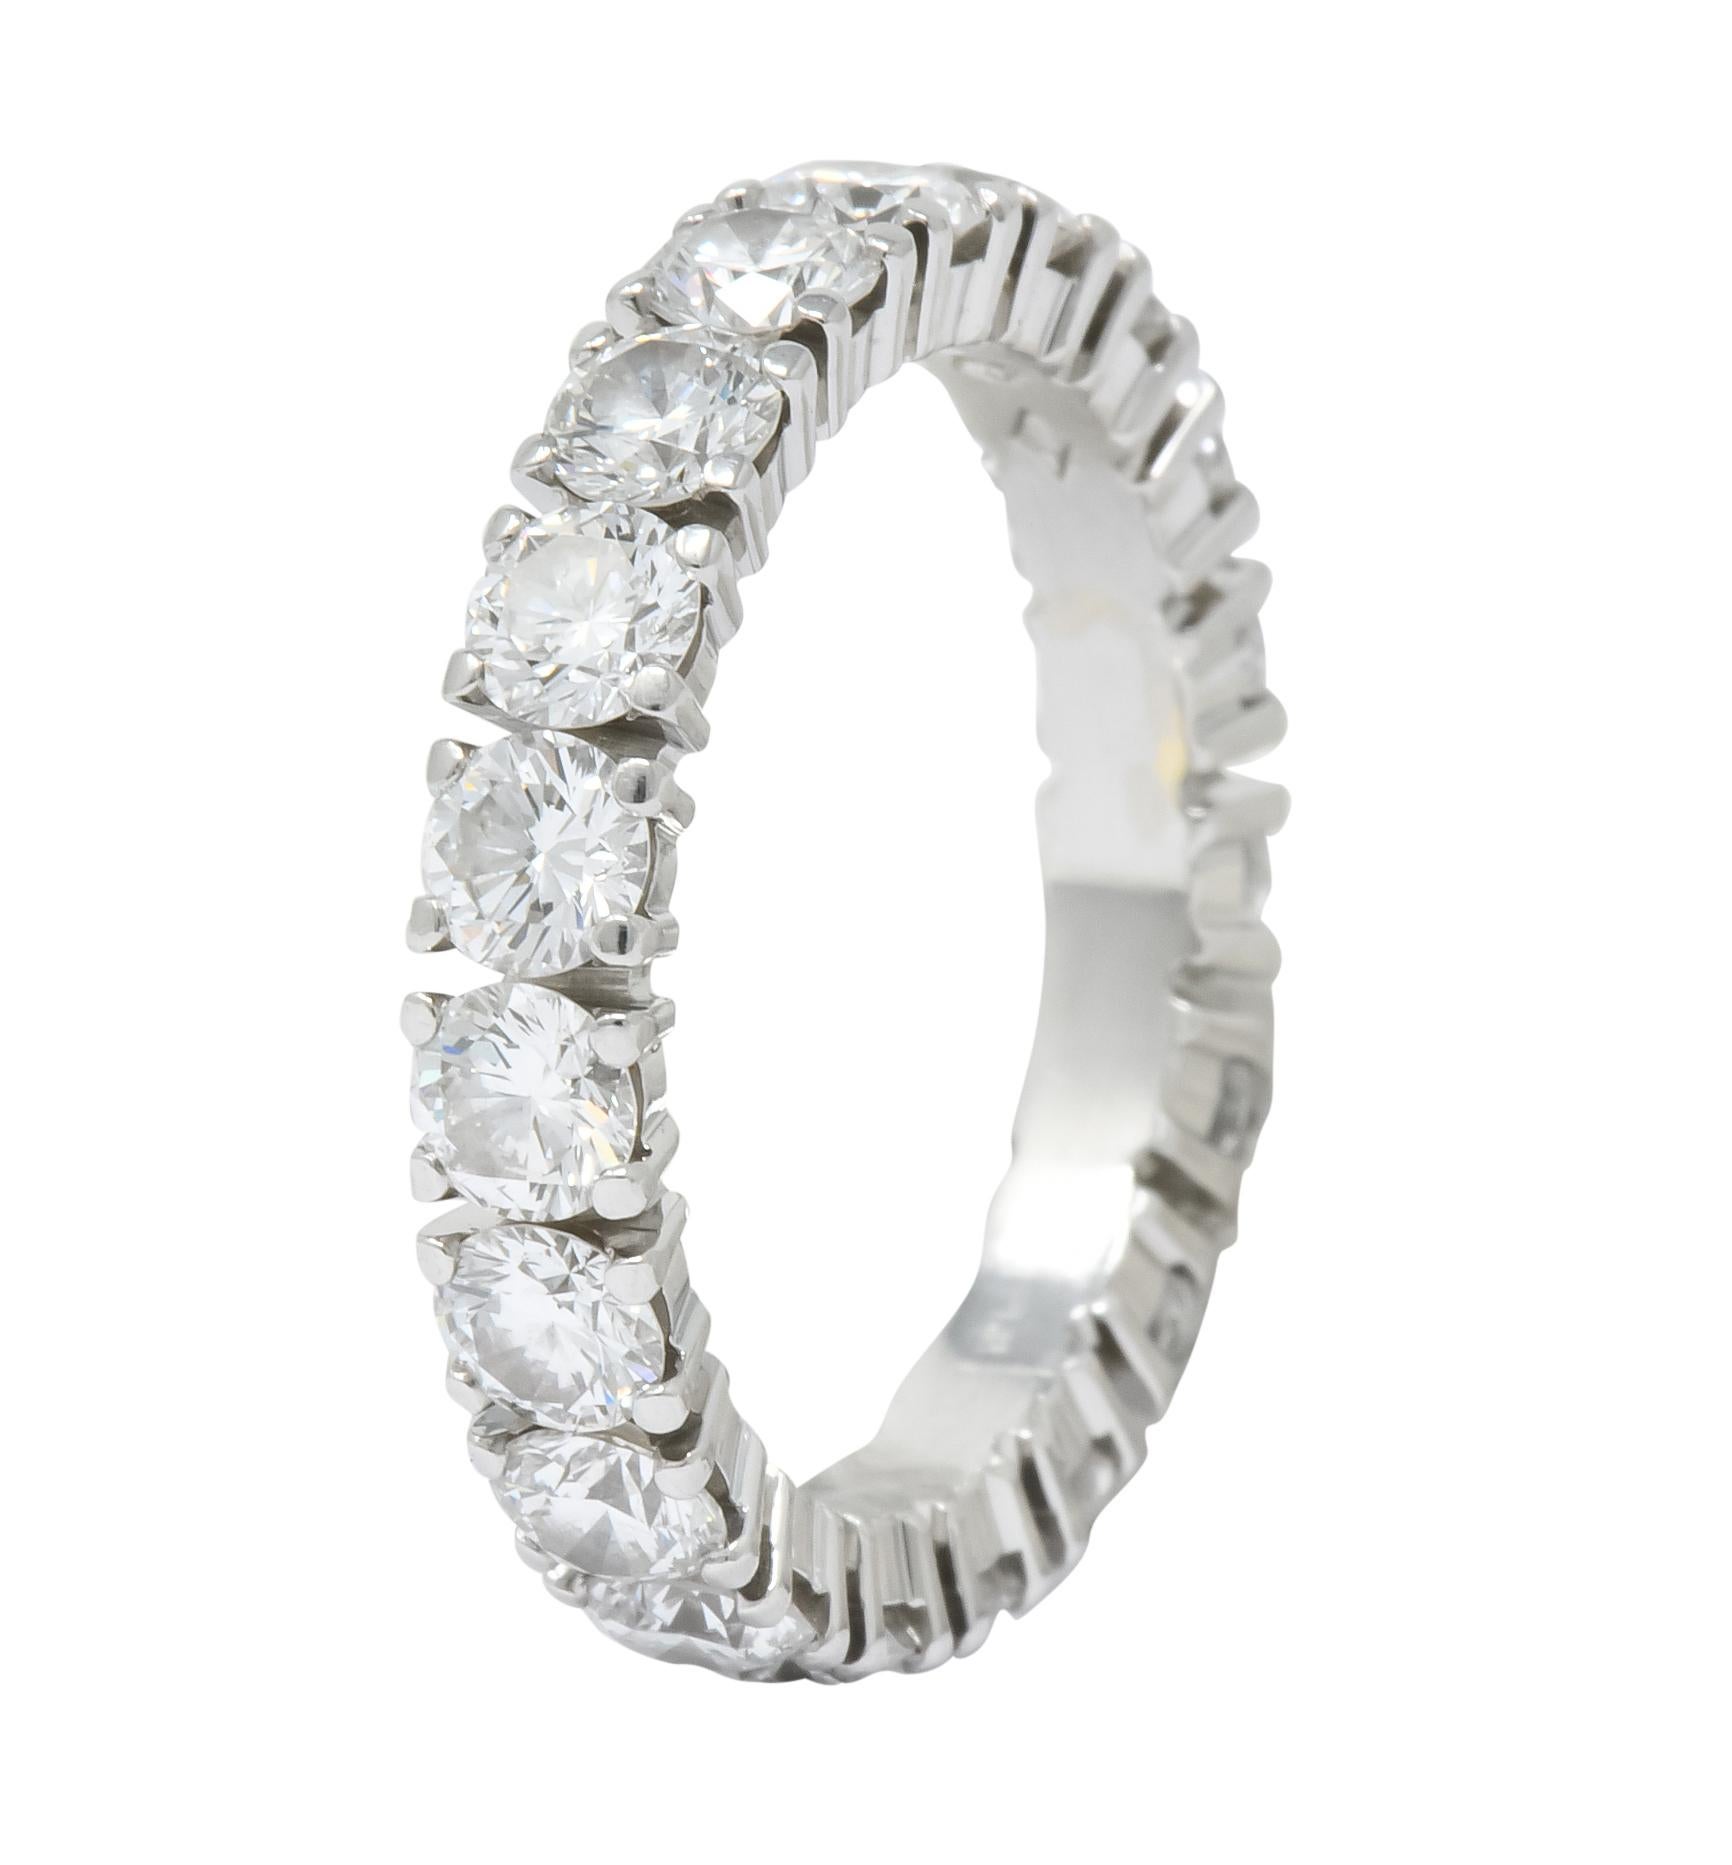 Eternity style band prong set throughout with round brilliant cut diamonds

Weighing 3.05 carats total with G//H color with VS clarity (one diamond is SI)

Fully signed Cartier and numbered with Switzerland assay marks for Platinum

Stamped 54 for